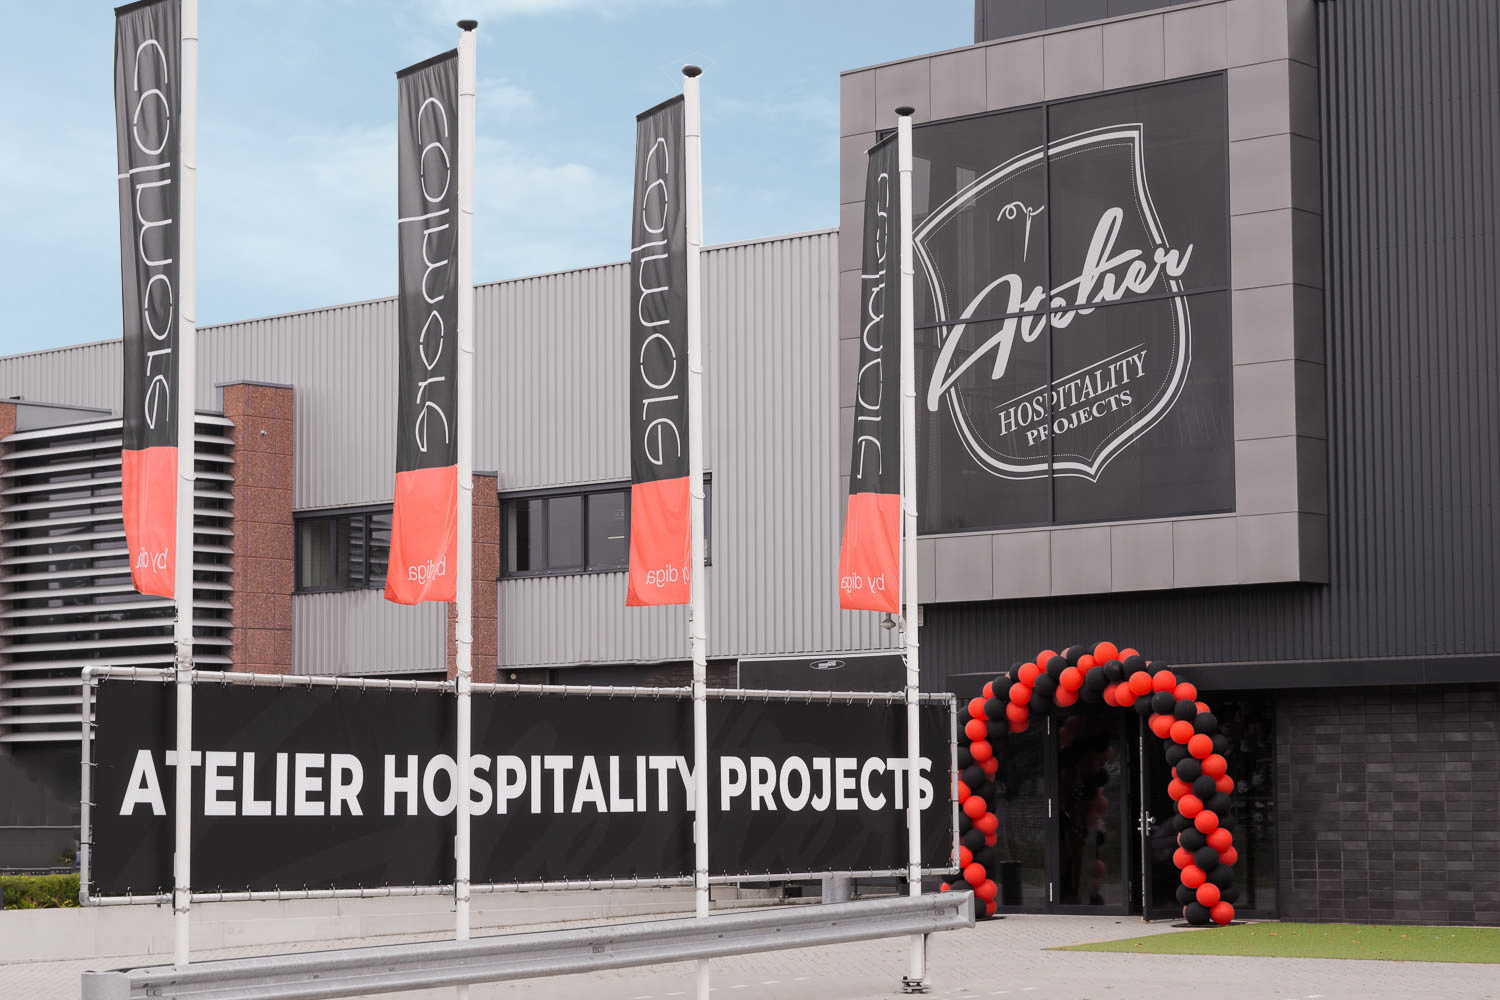 Atelier Hospitality Projects officieel geopend